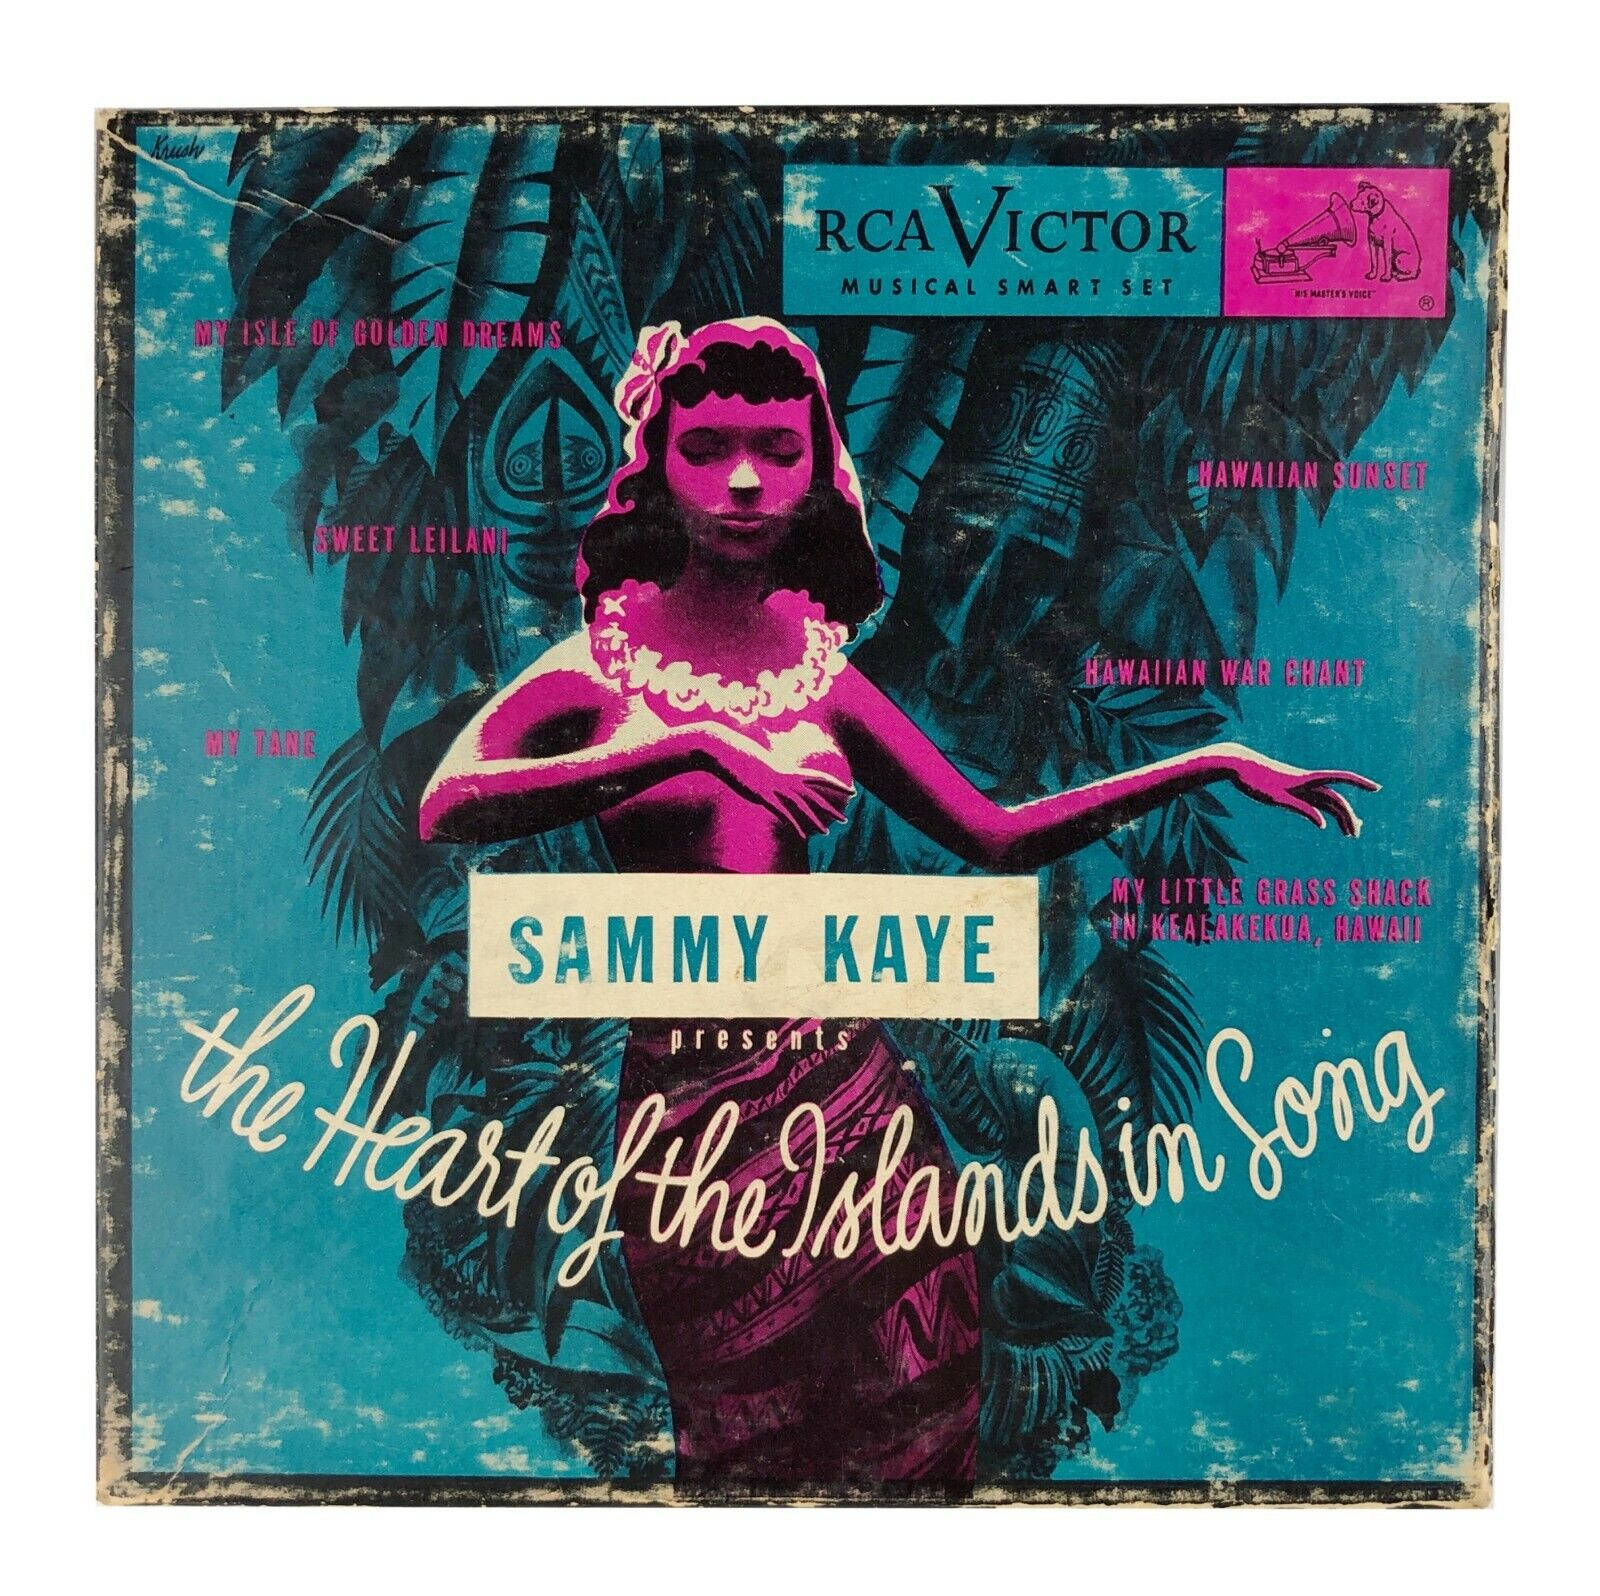 Sammy Kaye The Heart Of The Islands In Song Vinyl Cover Wallpaper